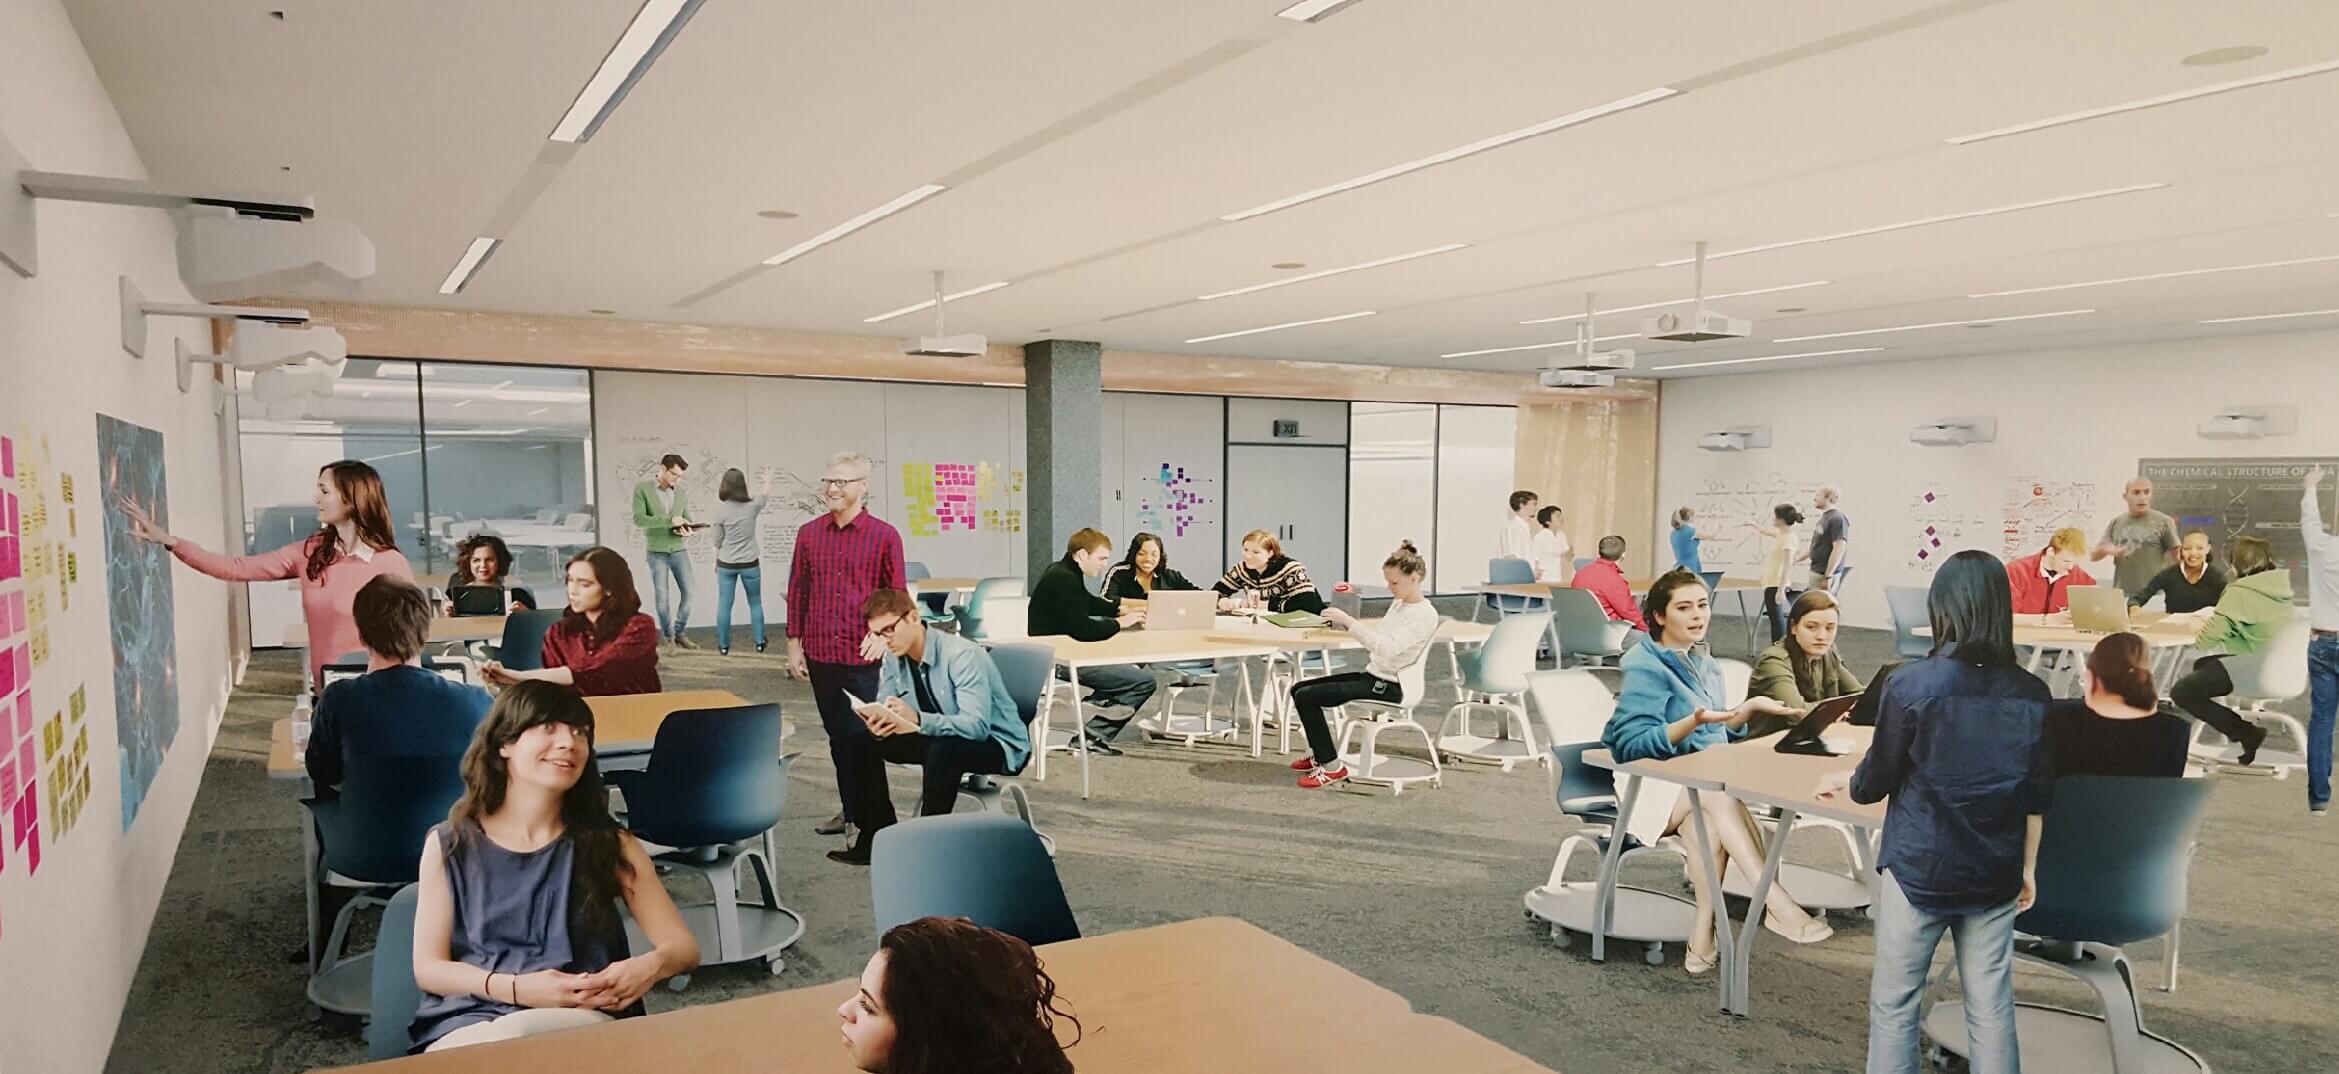 artist rendering of Active Learning Classroom